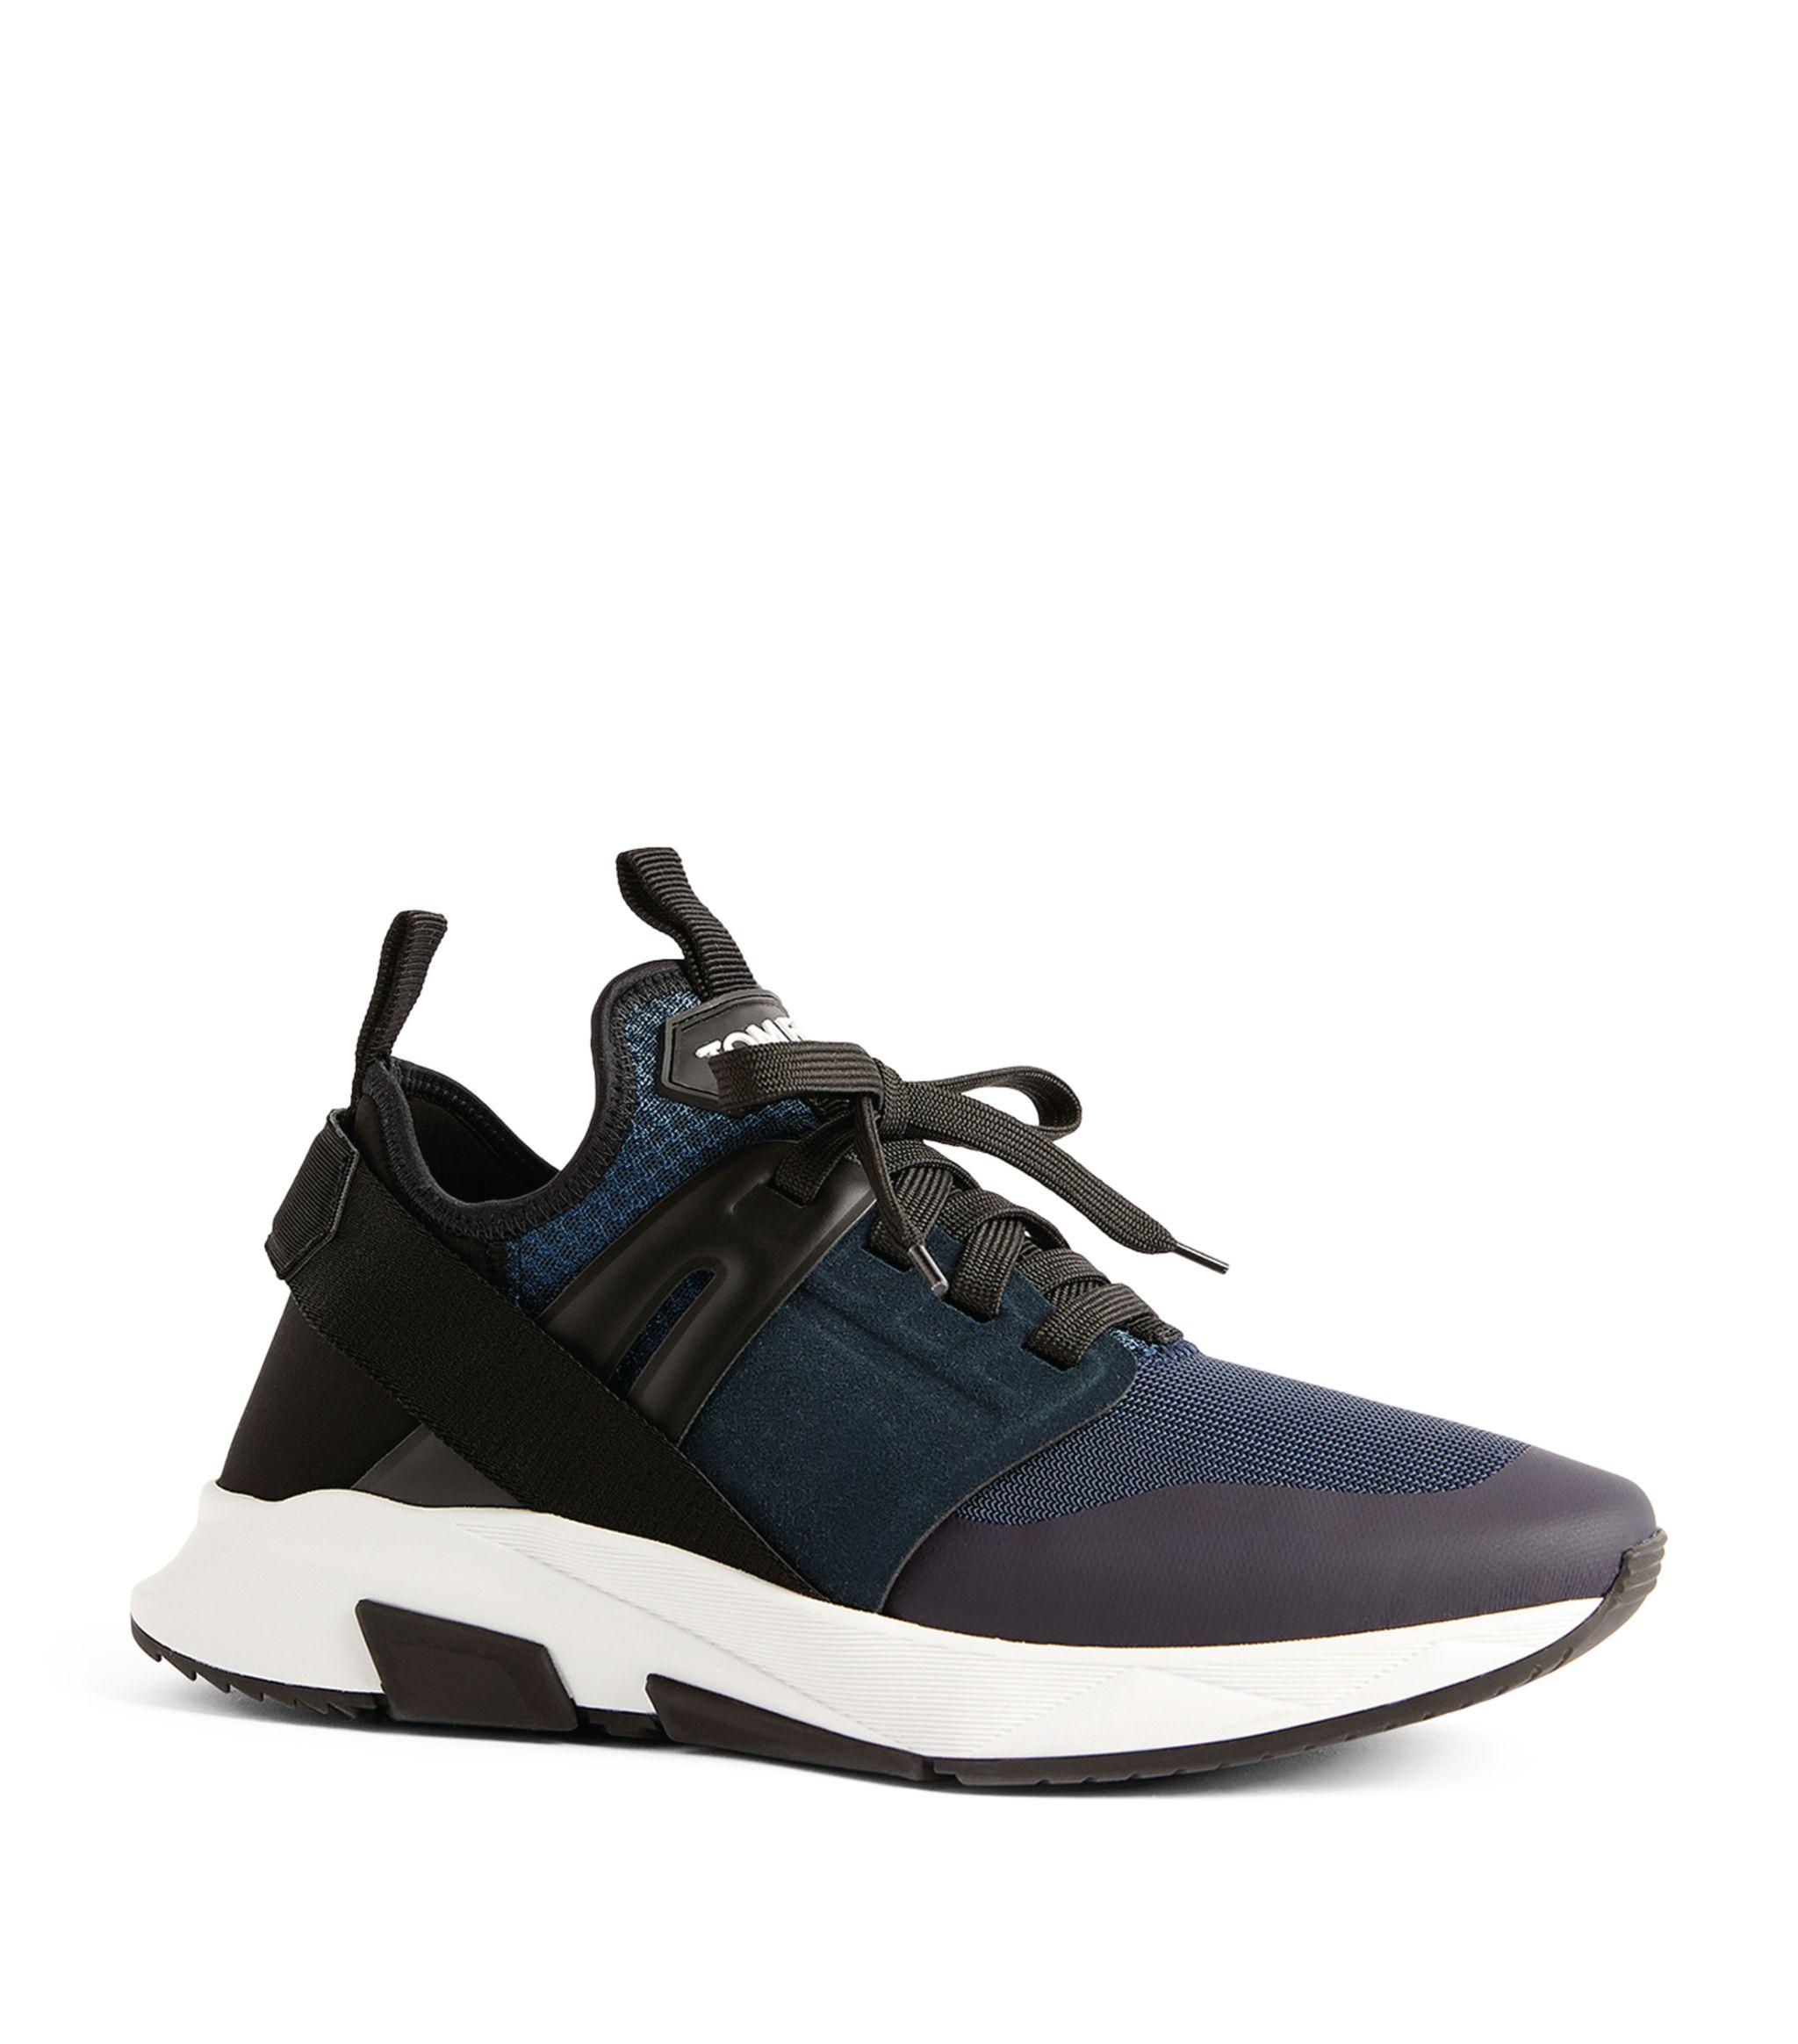 Tom Ford Leather Jago Sneakers in Blue for Men - Lyst